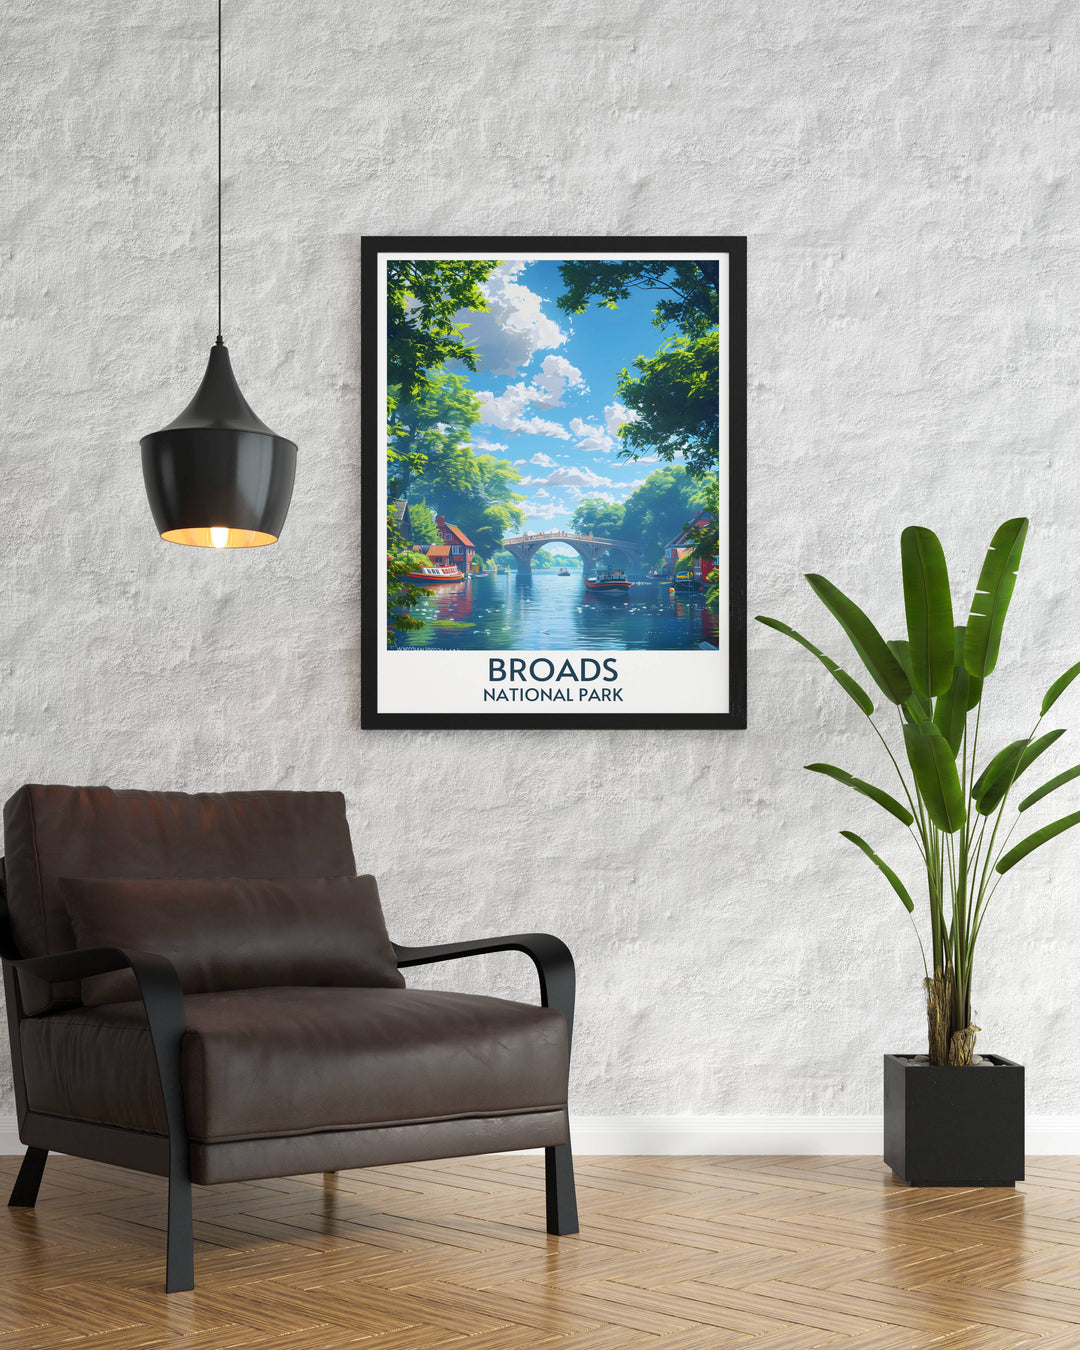 Add a touch of nostalgia to your home with a Wroxham Bridge Digital Print. Featuring a vintage travel poster style, this print highlights the scenic beauty of the Norfolk Broads and makes a wonderful gift for any occasion